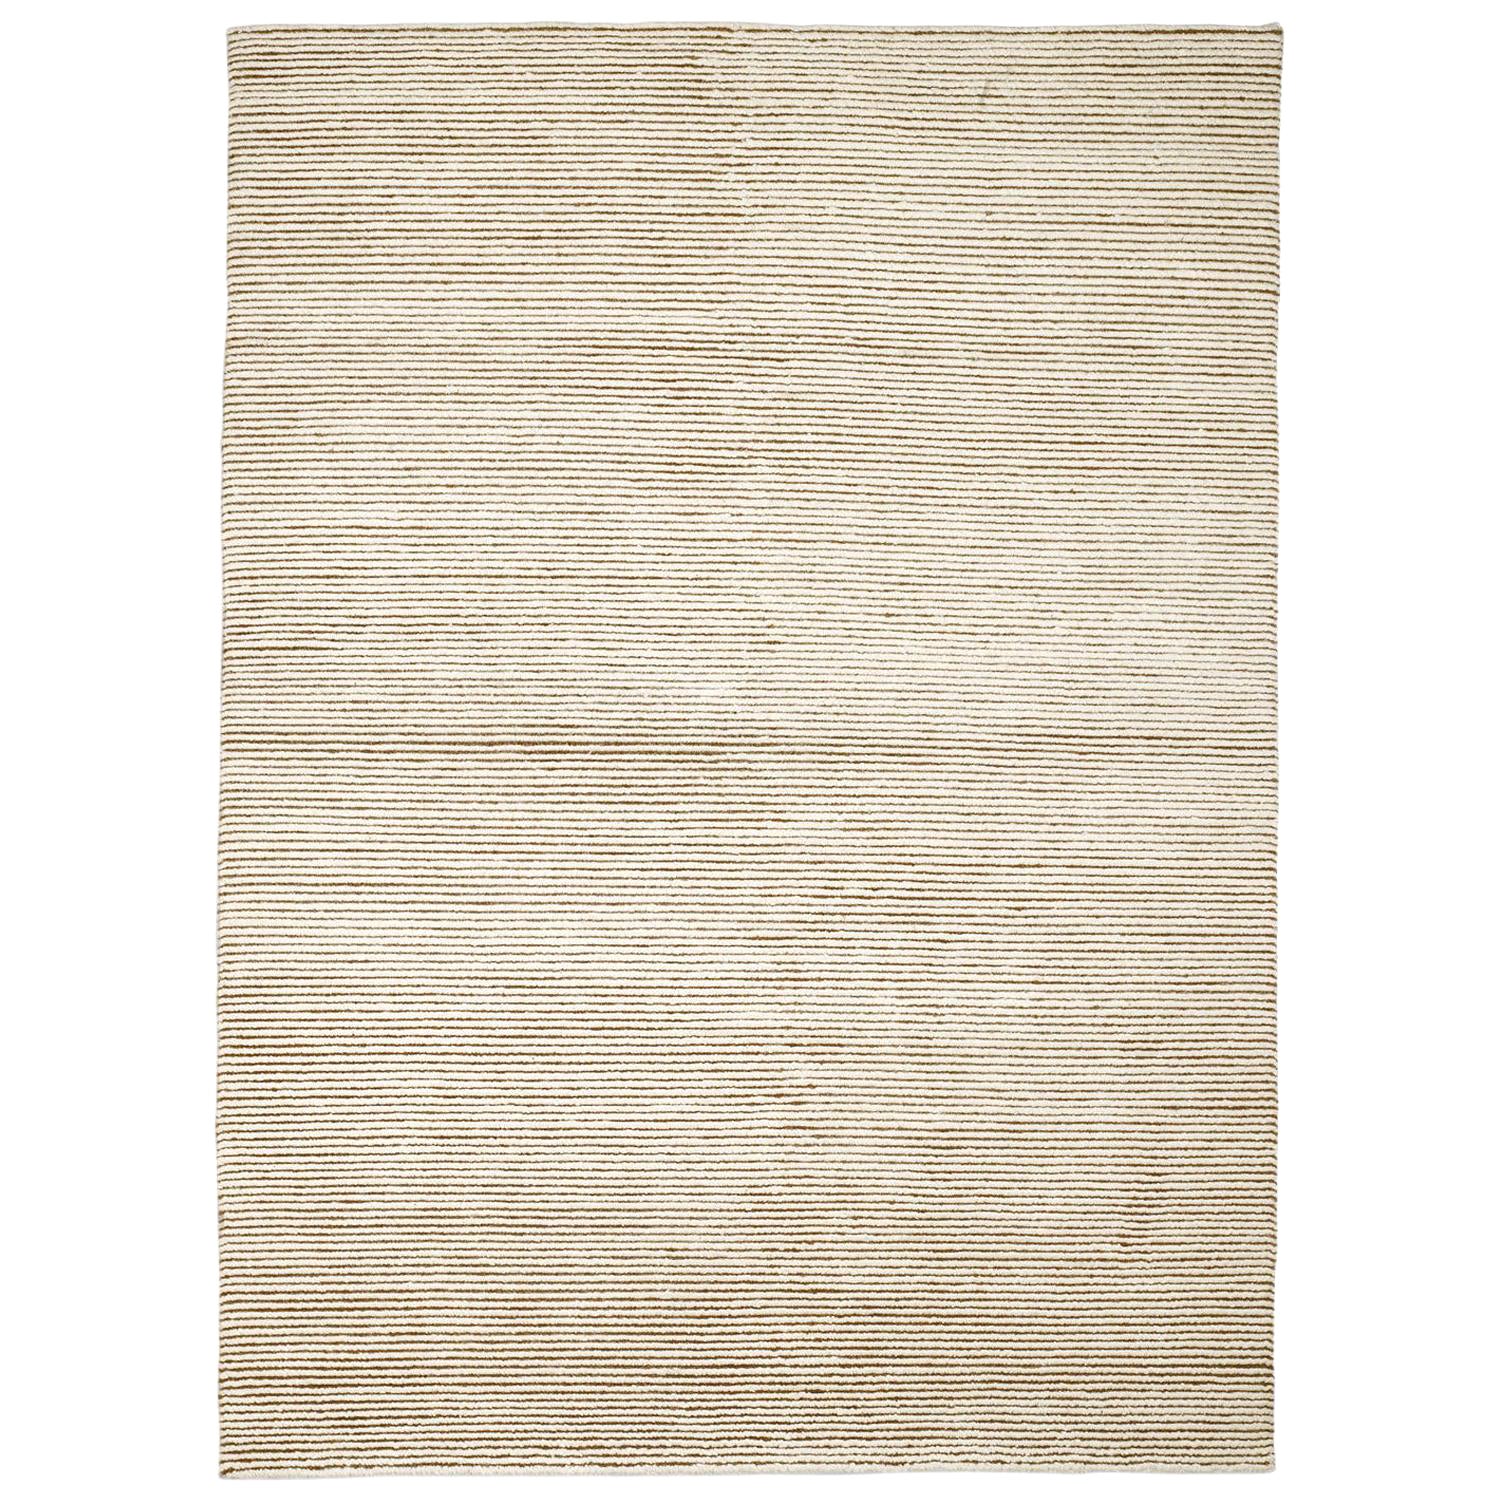 Contemporary Warm Ivory Wool Durable Rug by Deanna Comellini In Stock 170x240 cm For Sale